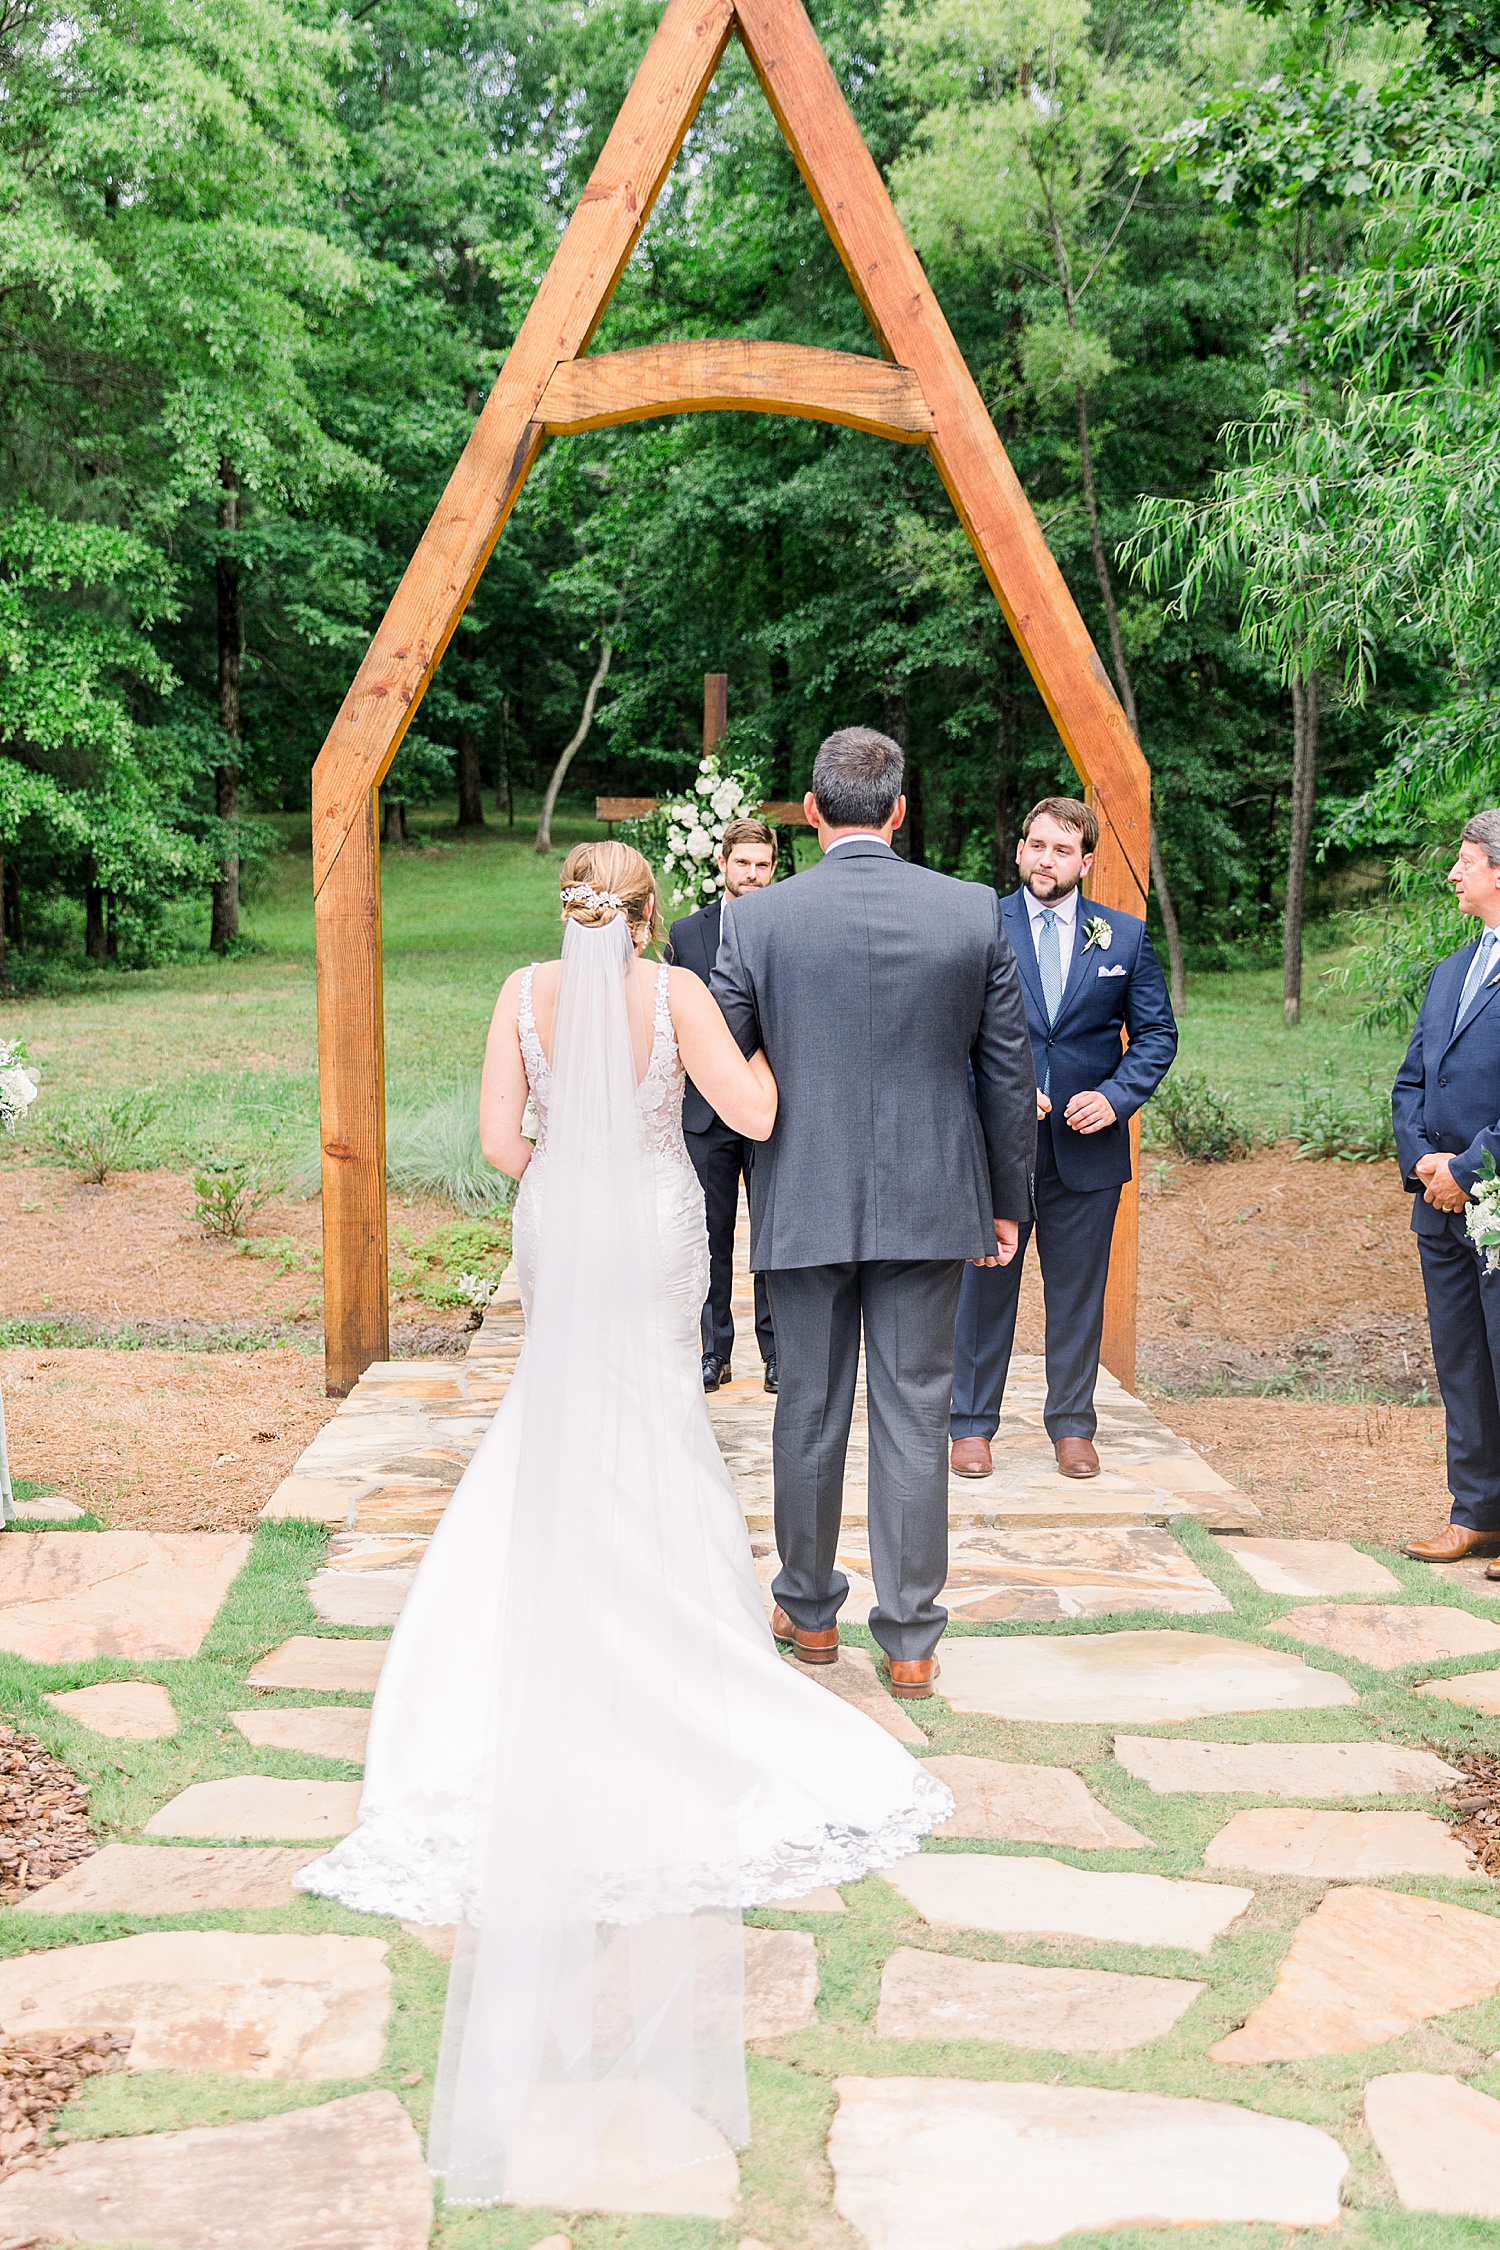 Father-of-the-bride and daughter walk down aisle in outdoor summer wedding ceremony